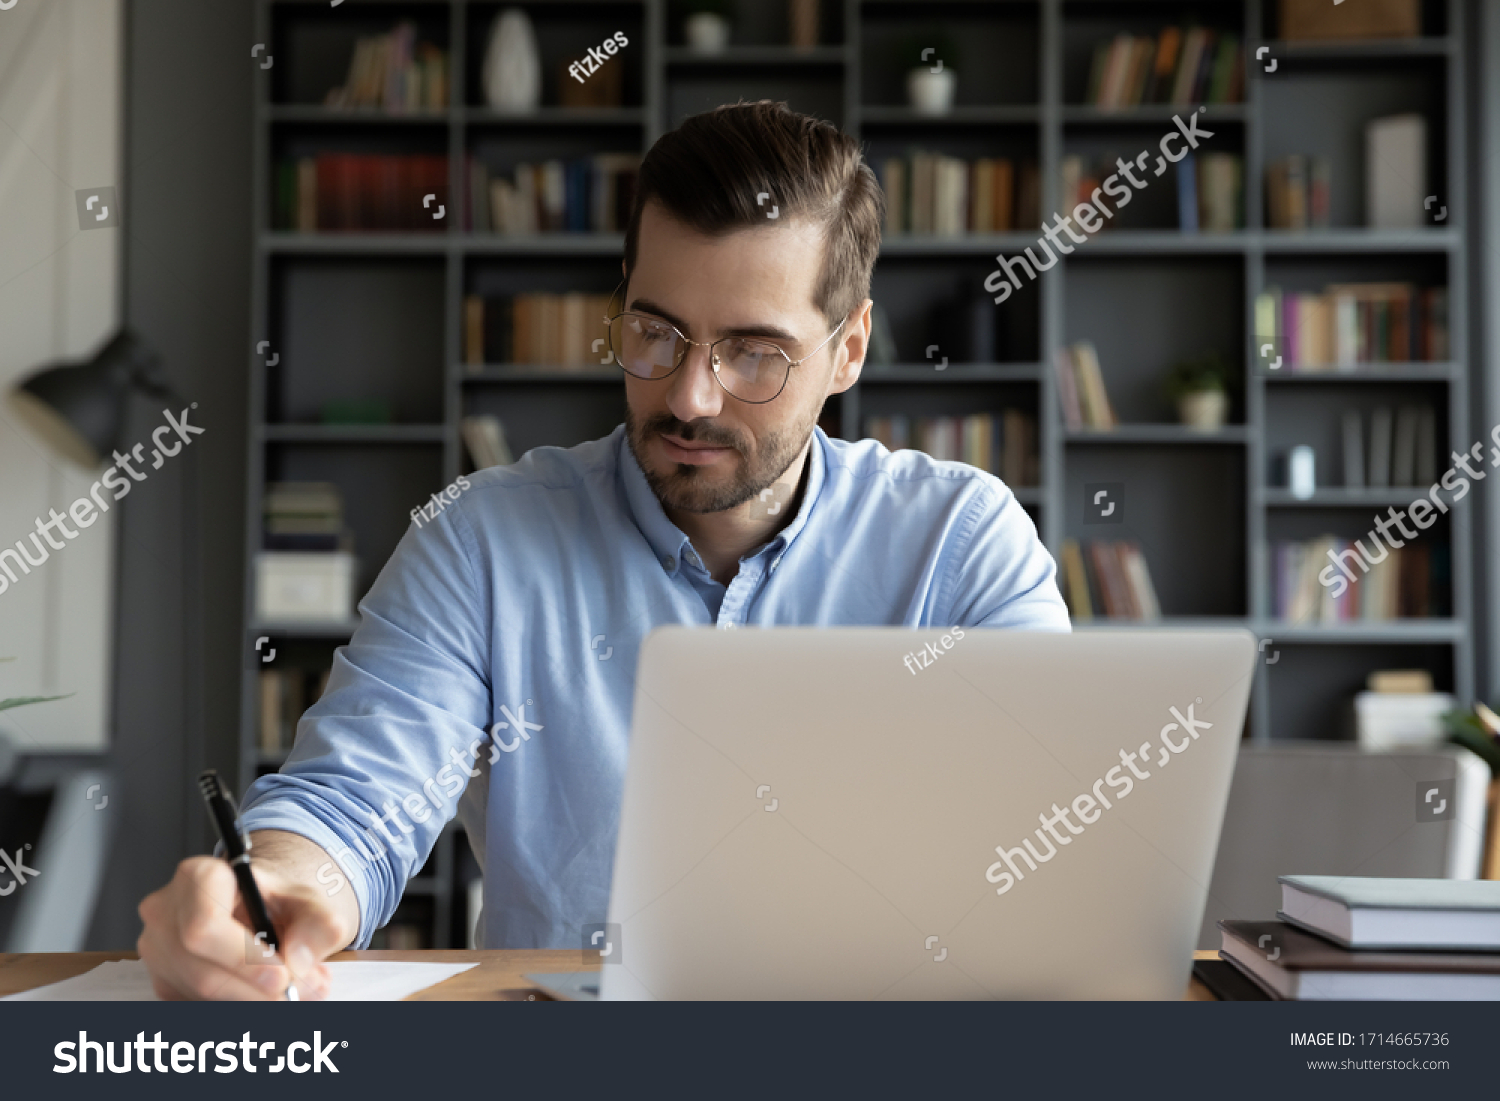 Confident businessman wearing glasses writing notes or financial report, sitting at desk with laptop, focused serious man working with paper documents, student studying online, research work #1714665736